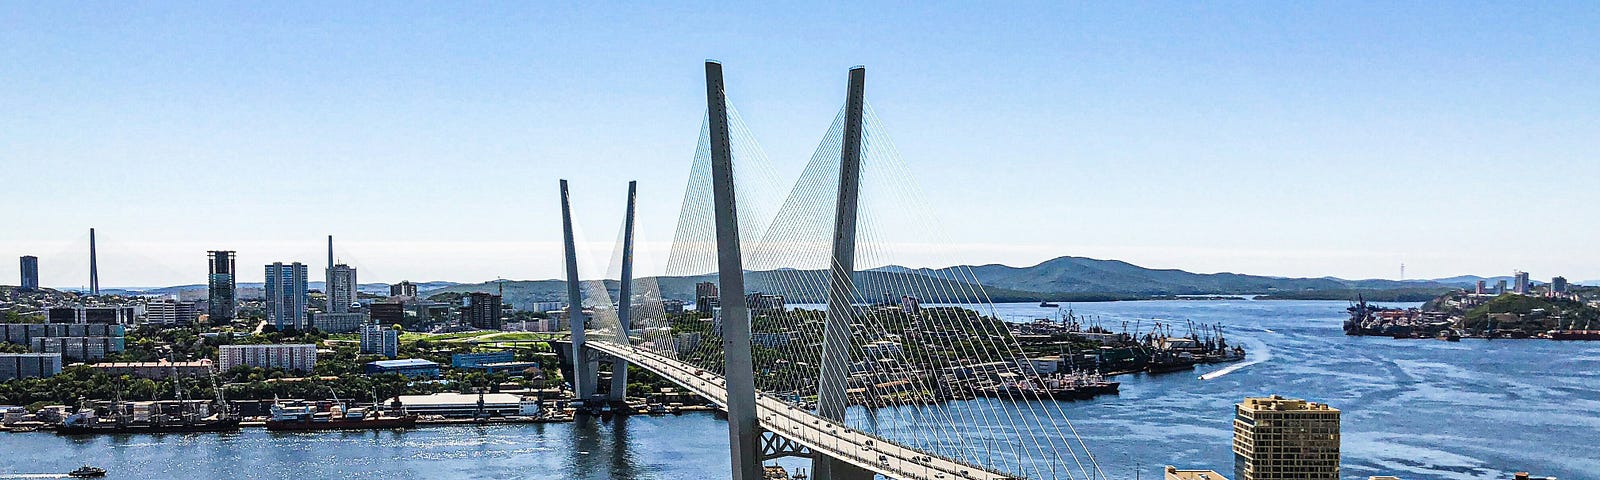 View of the bridge connecting the Russky Island and Vladivostok, Russia